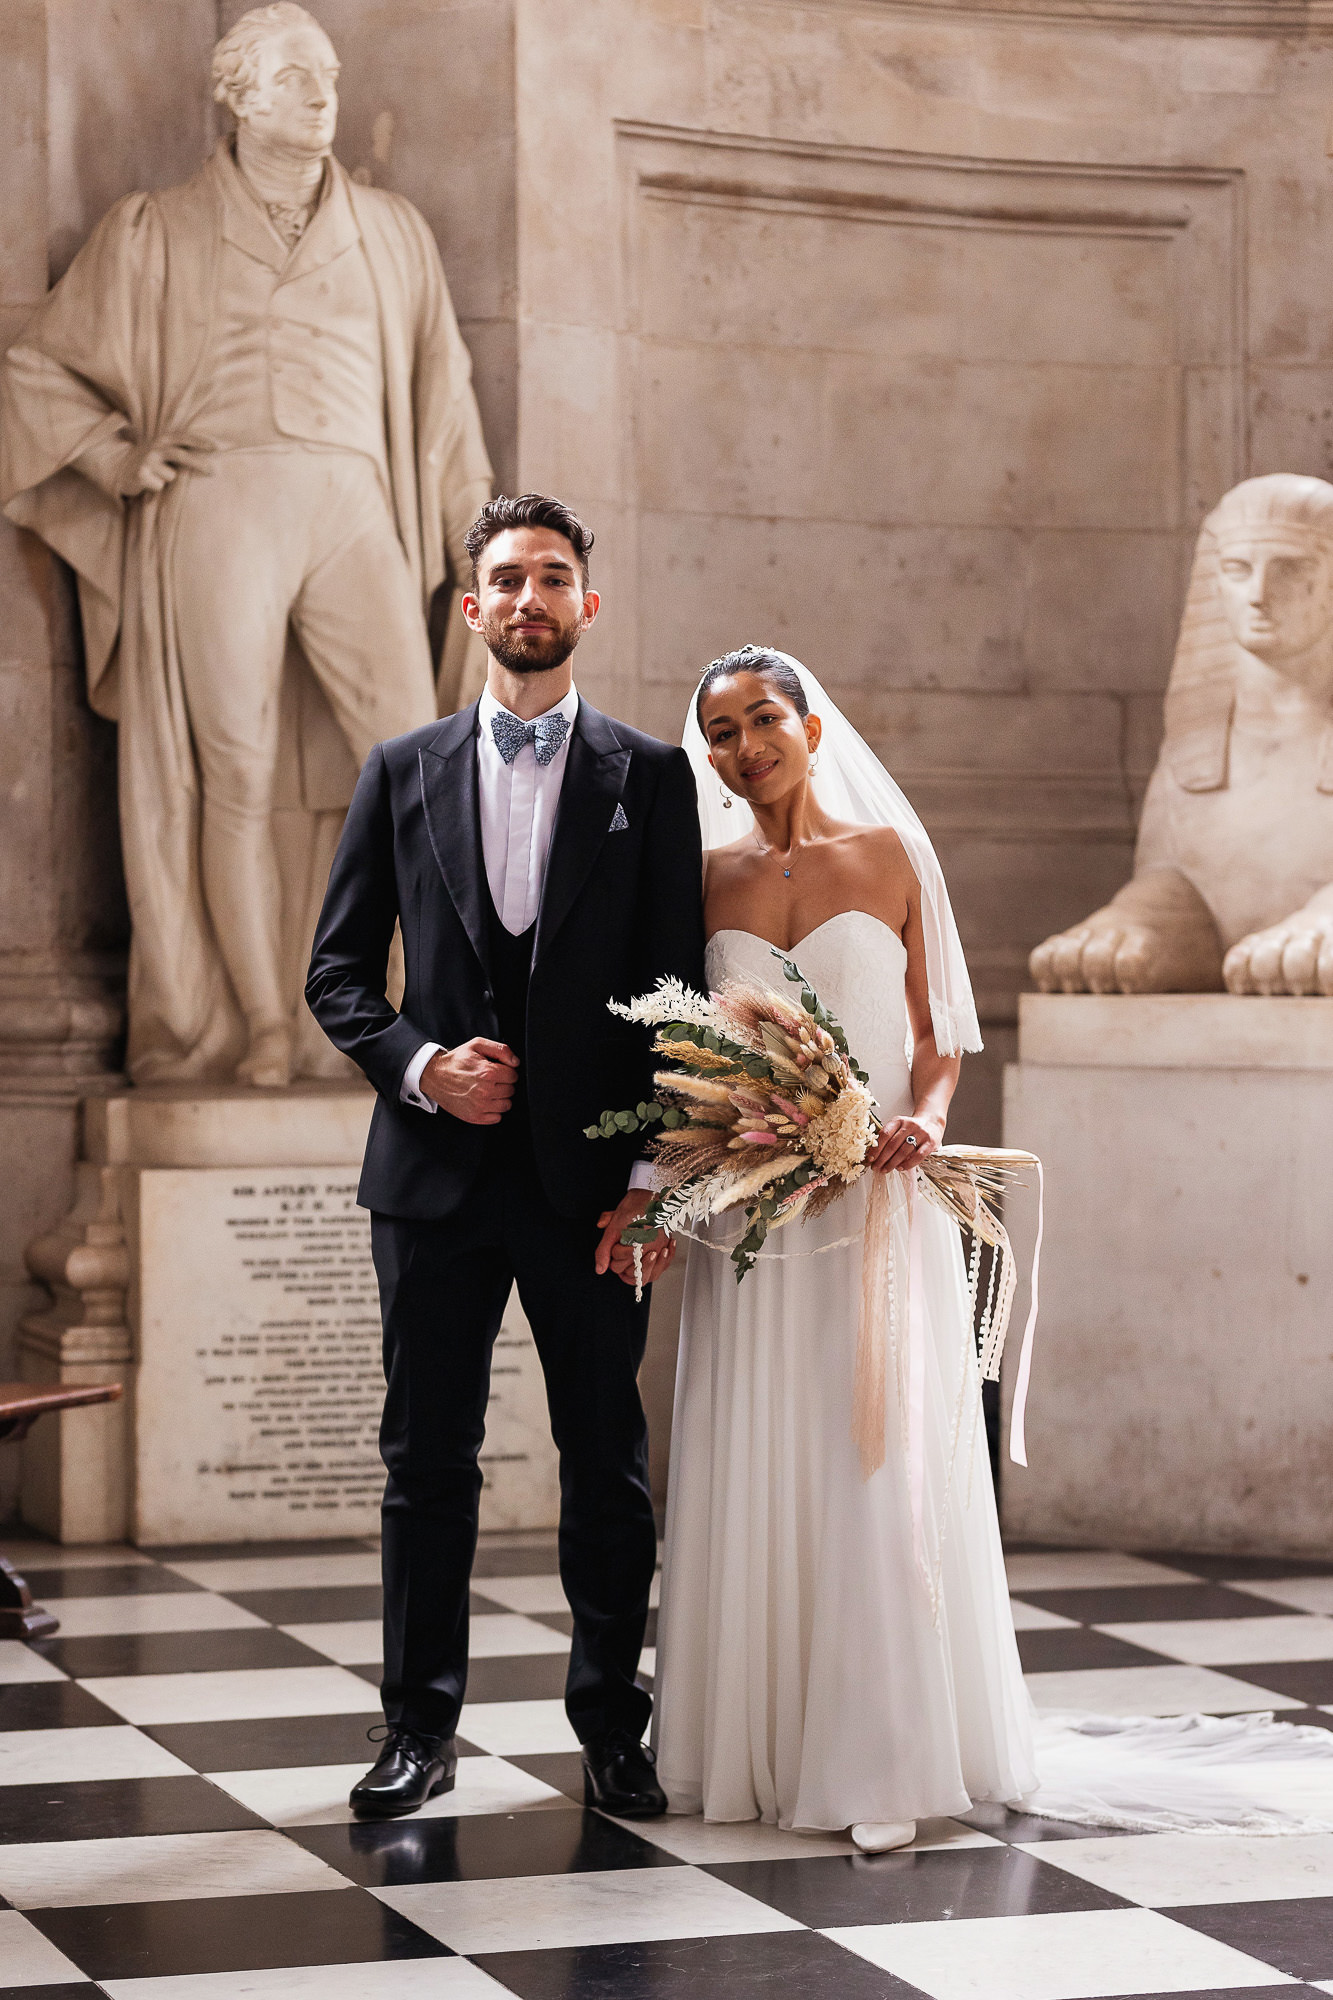 Multicultural wedding photographer, St Pauls Cathedral, London, Couples portraits